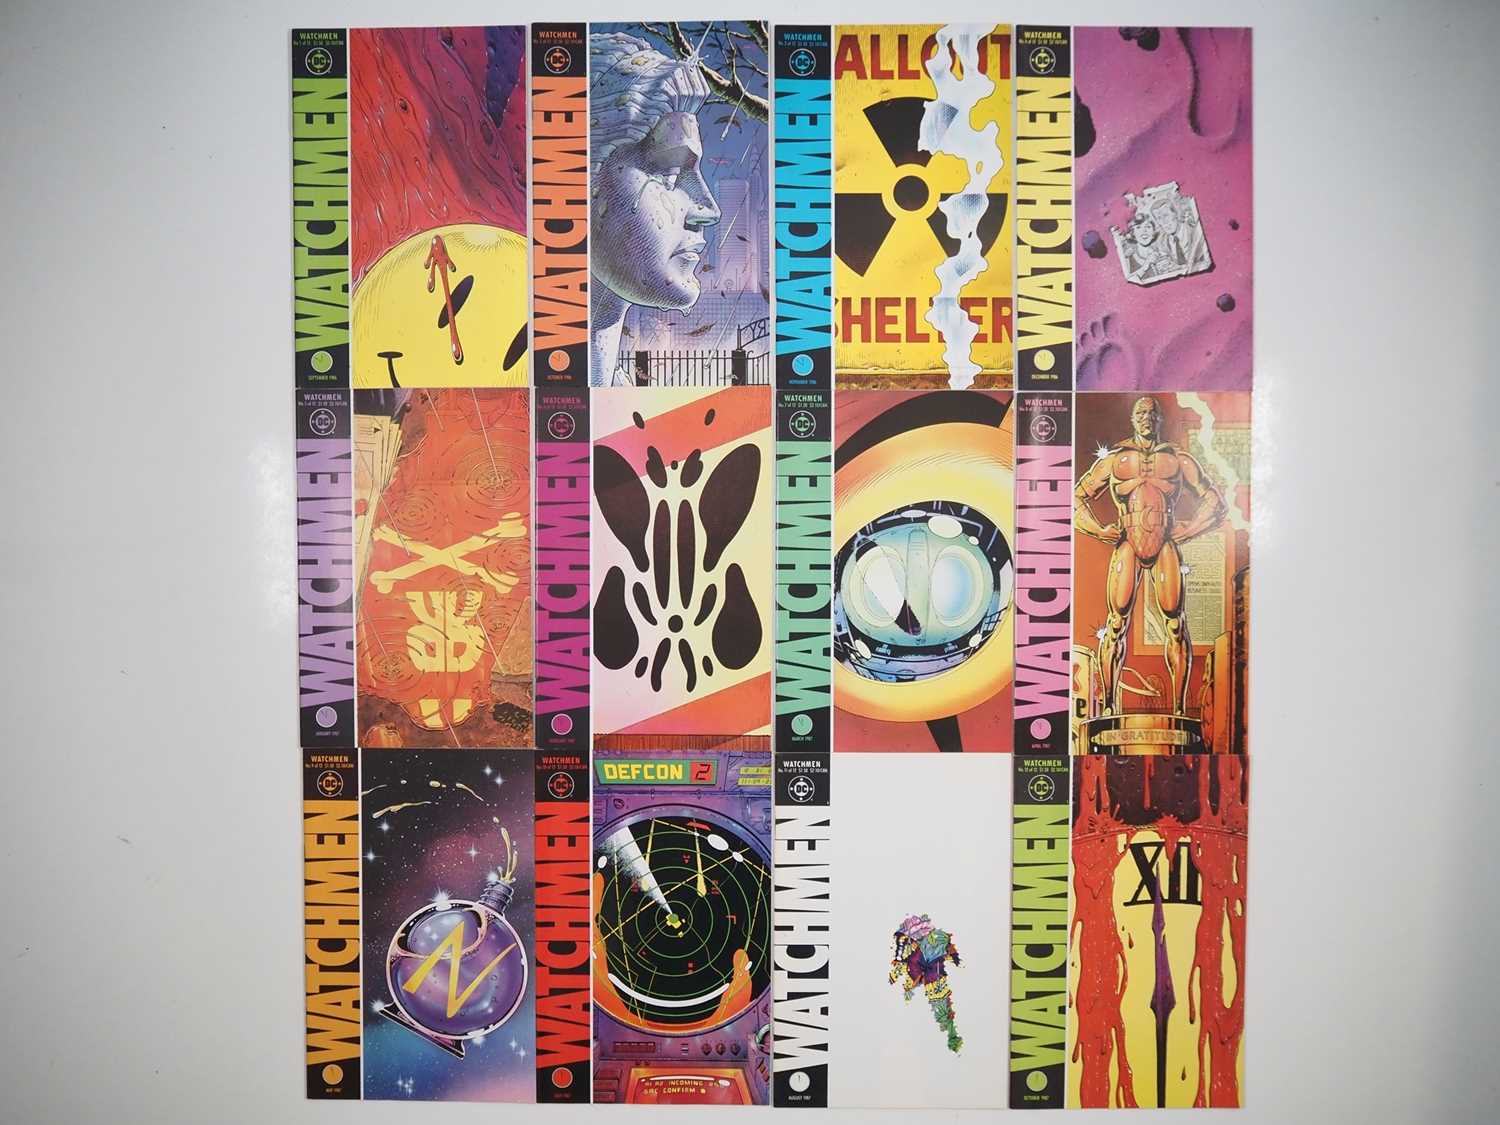 WATCHMEN #1, 2, 3, 4, 5, 6, 7, 8, 9, 10, 11, 12 - (12 in Lot) - (1986/87 - DC) - ALL First Printings